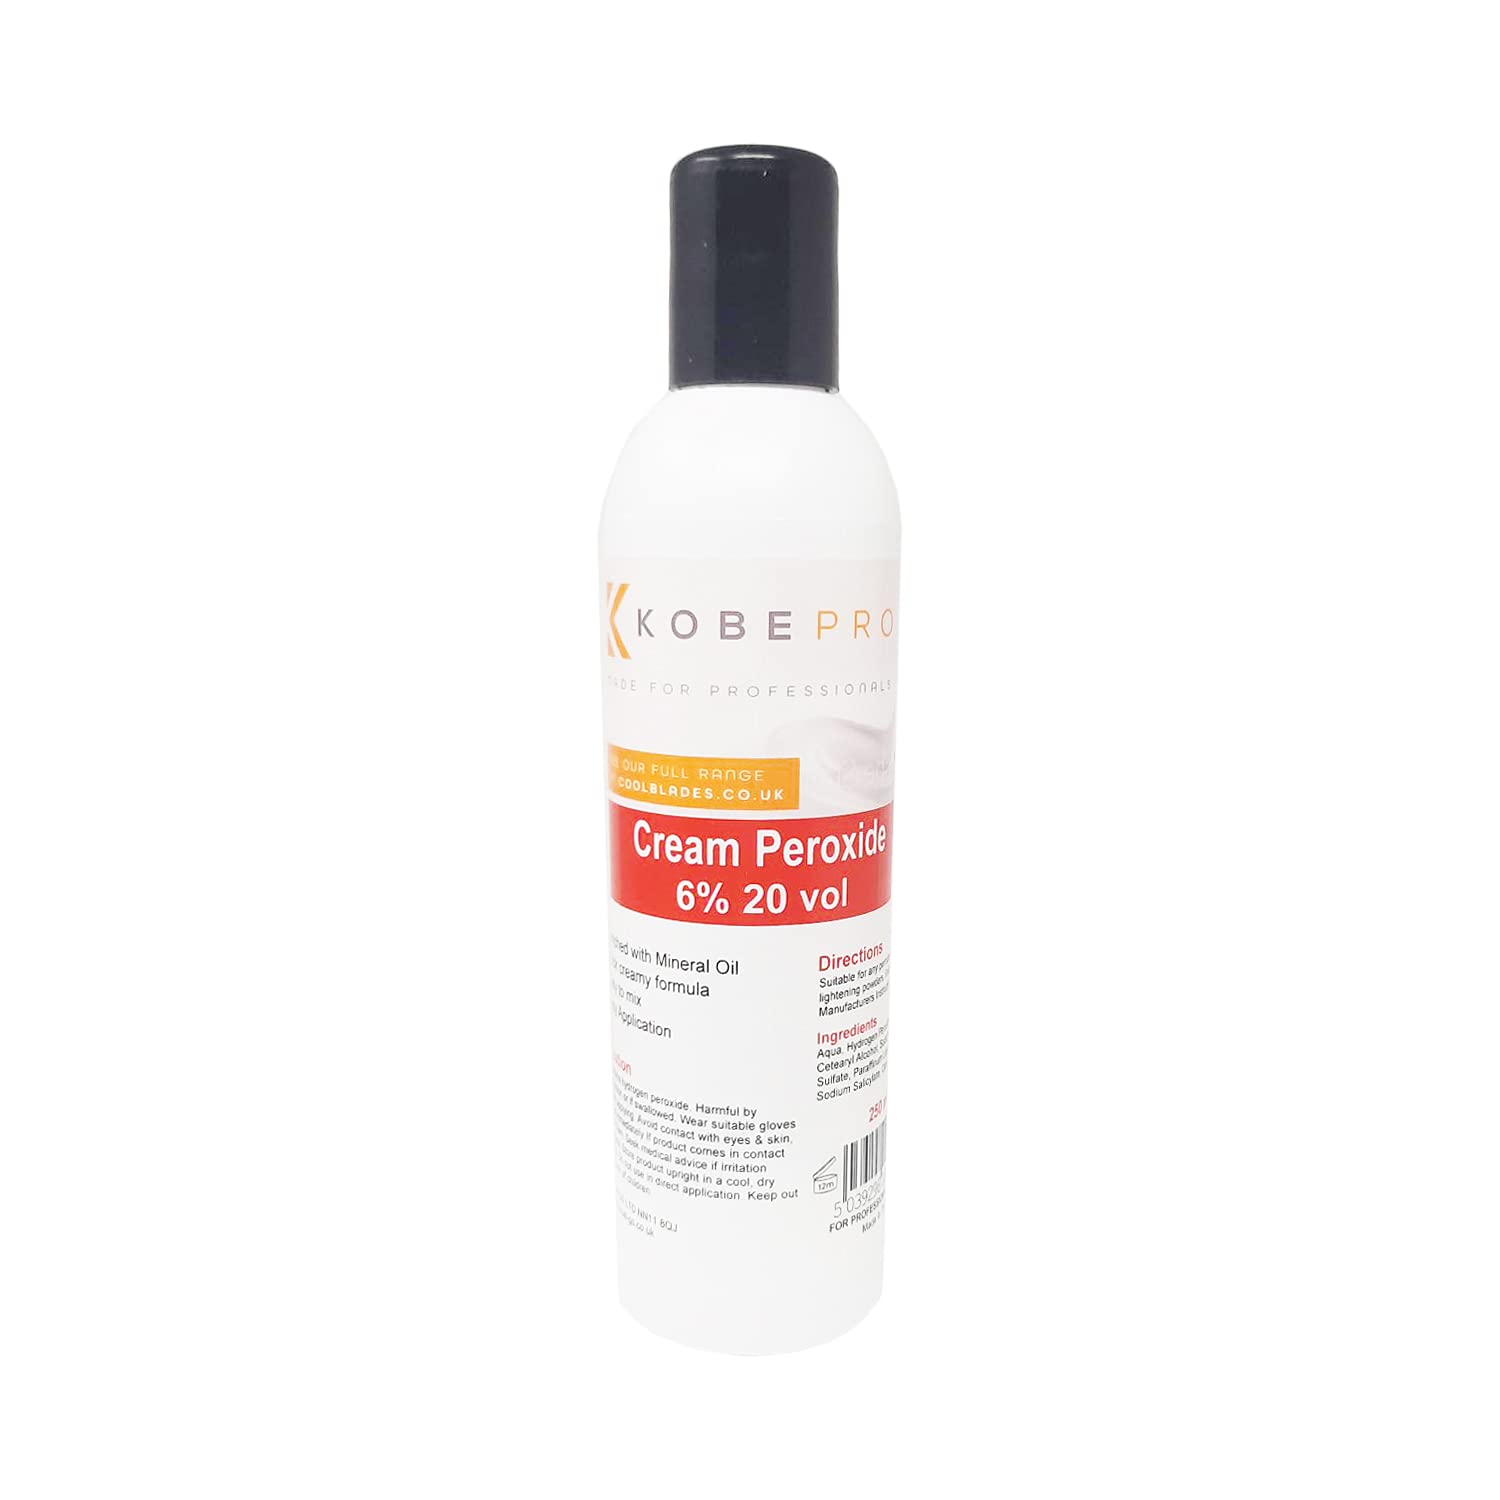 Kobe Professional Hairdressing Cream Peroxide Developer 6% 20 Vol 250 ml - Works With All Colour Brands